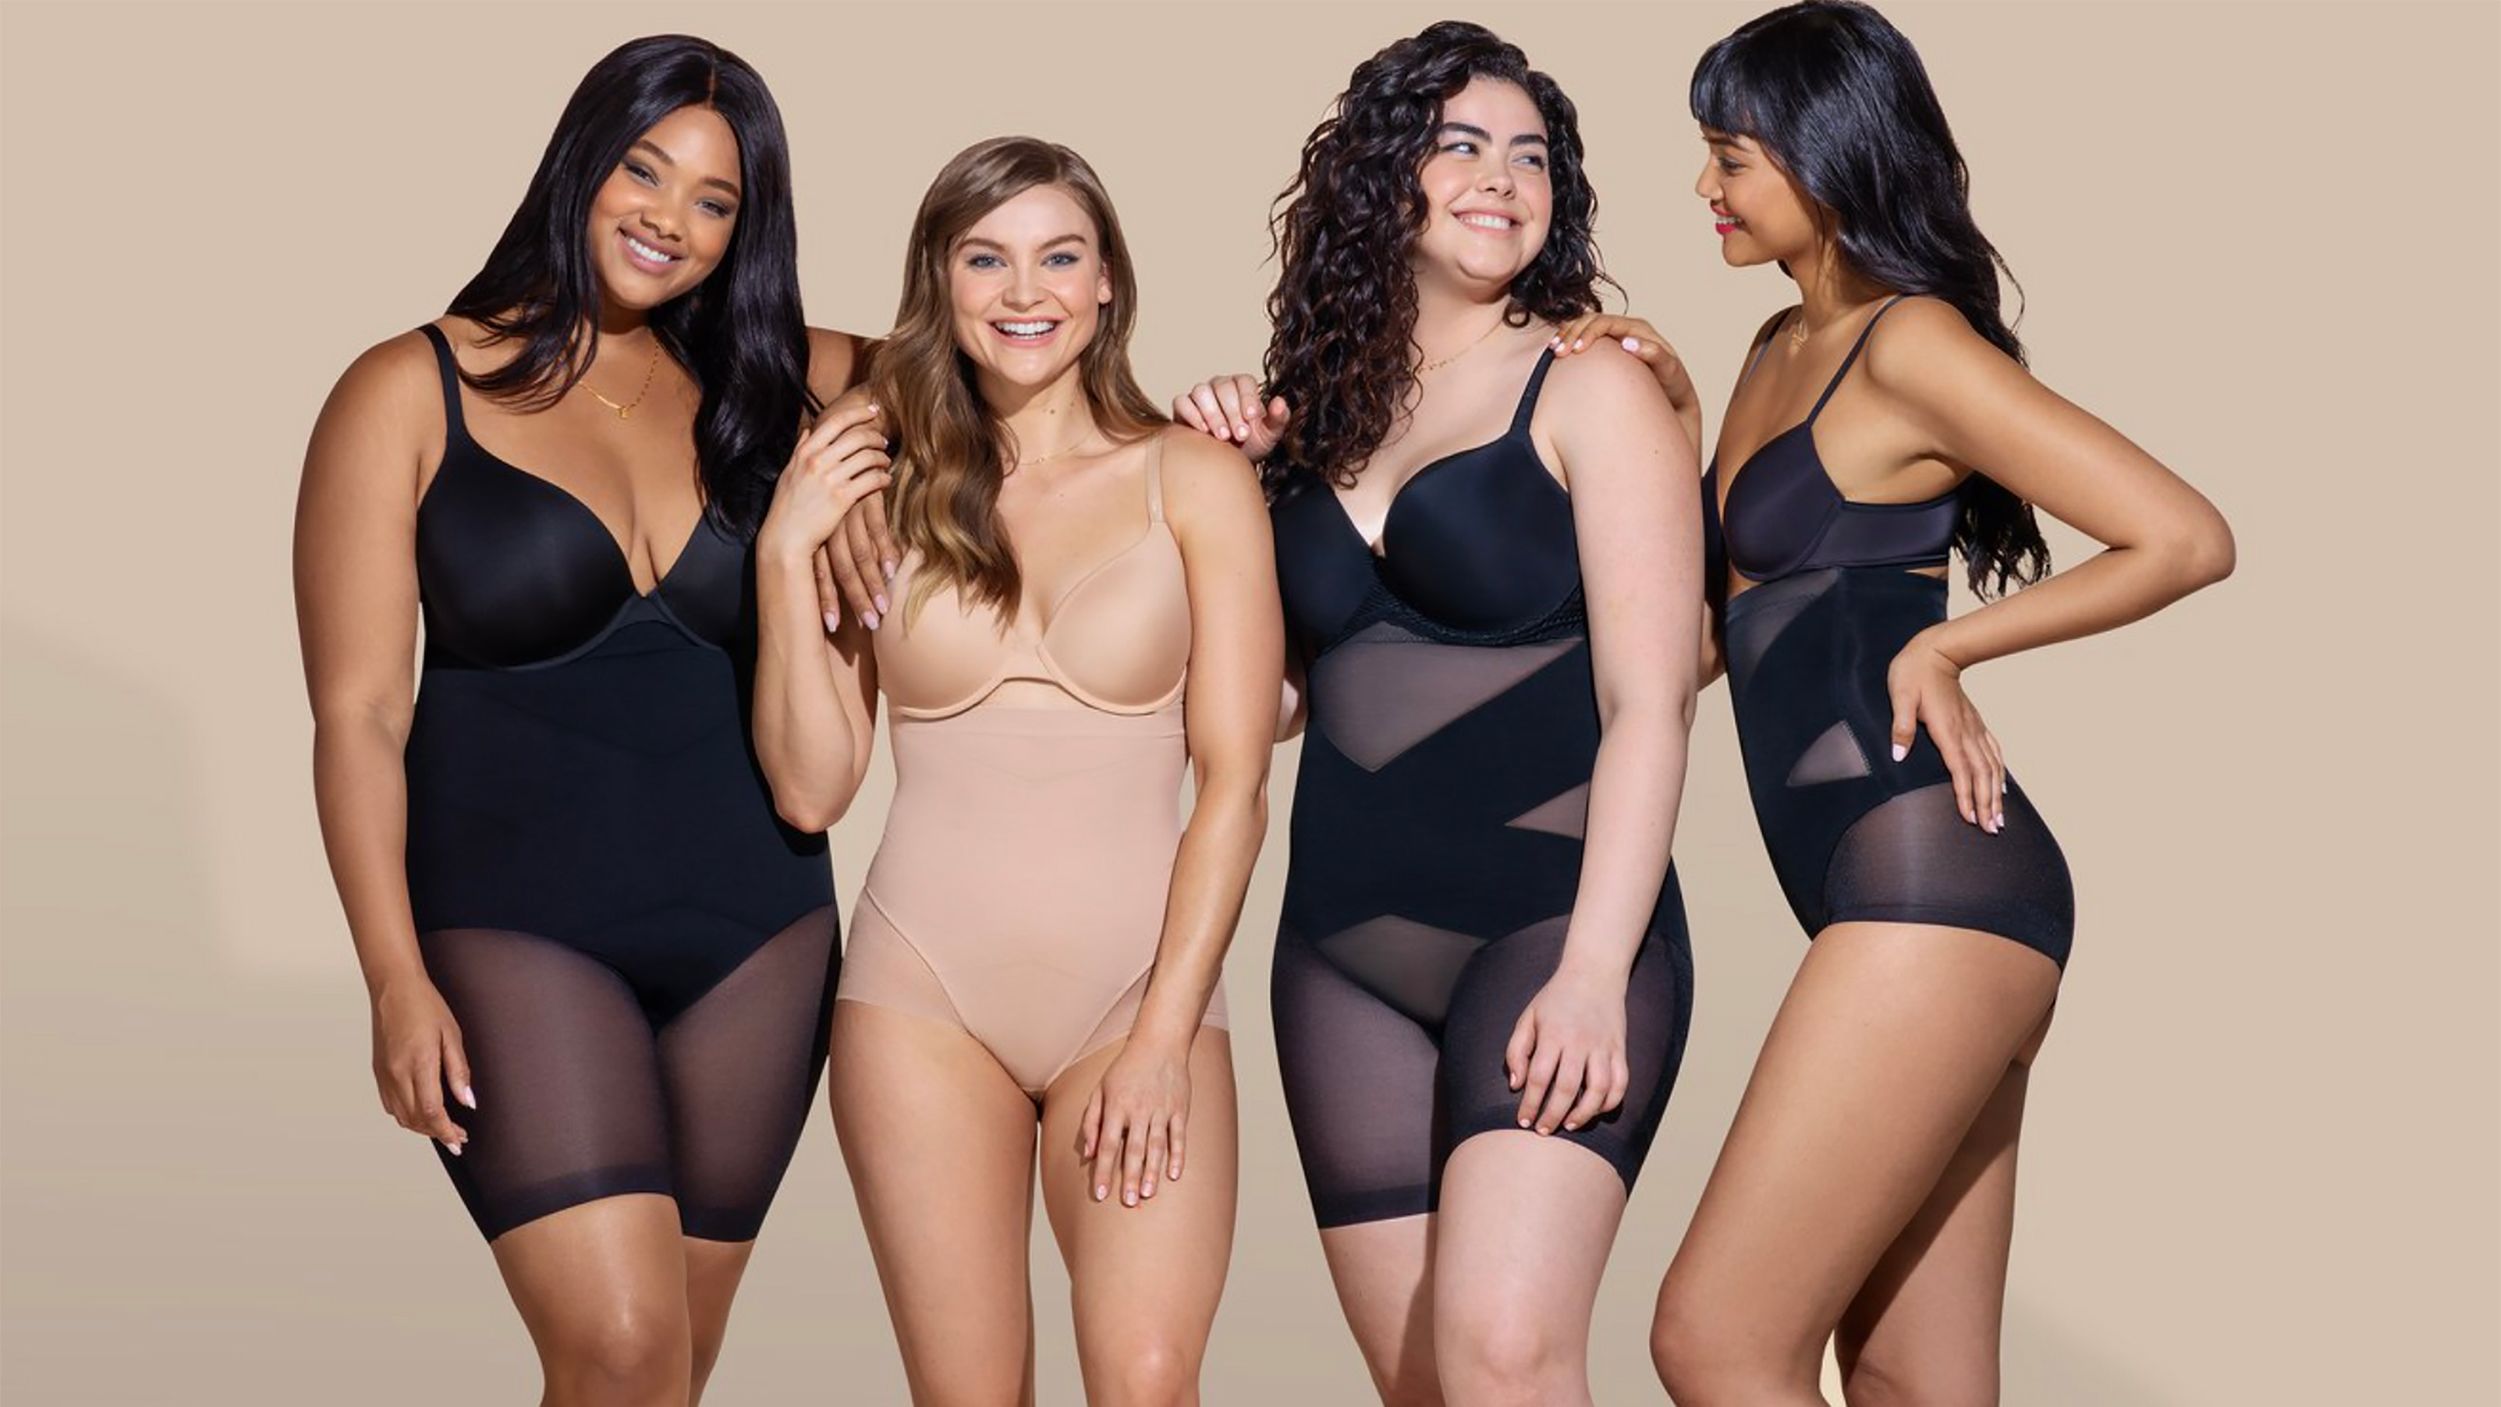 Wunderlove By Westside, Every smart woman knows that good innerwear is an  investment. Get the best in shapewear from Wunderlove by Westside.  #BeTheSpark Shop at